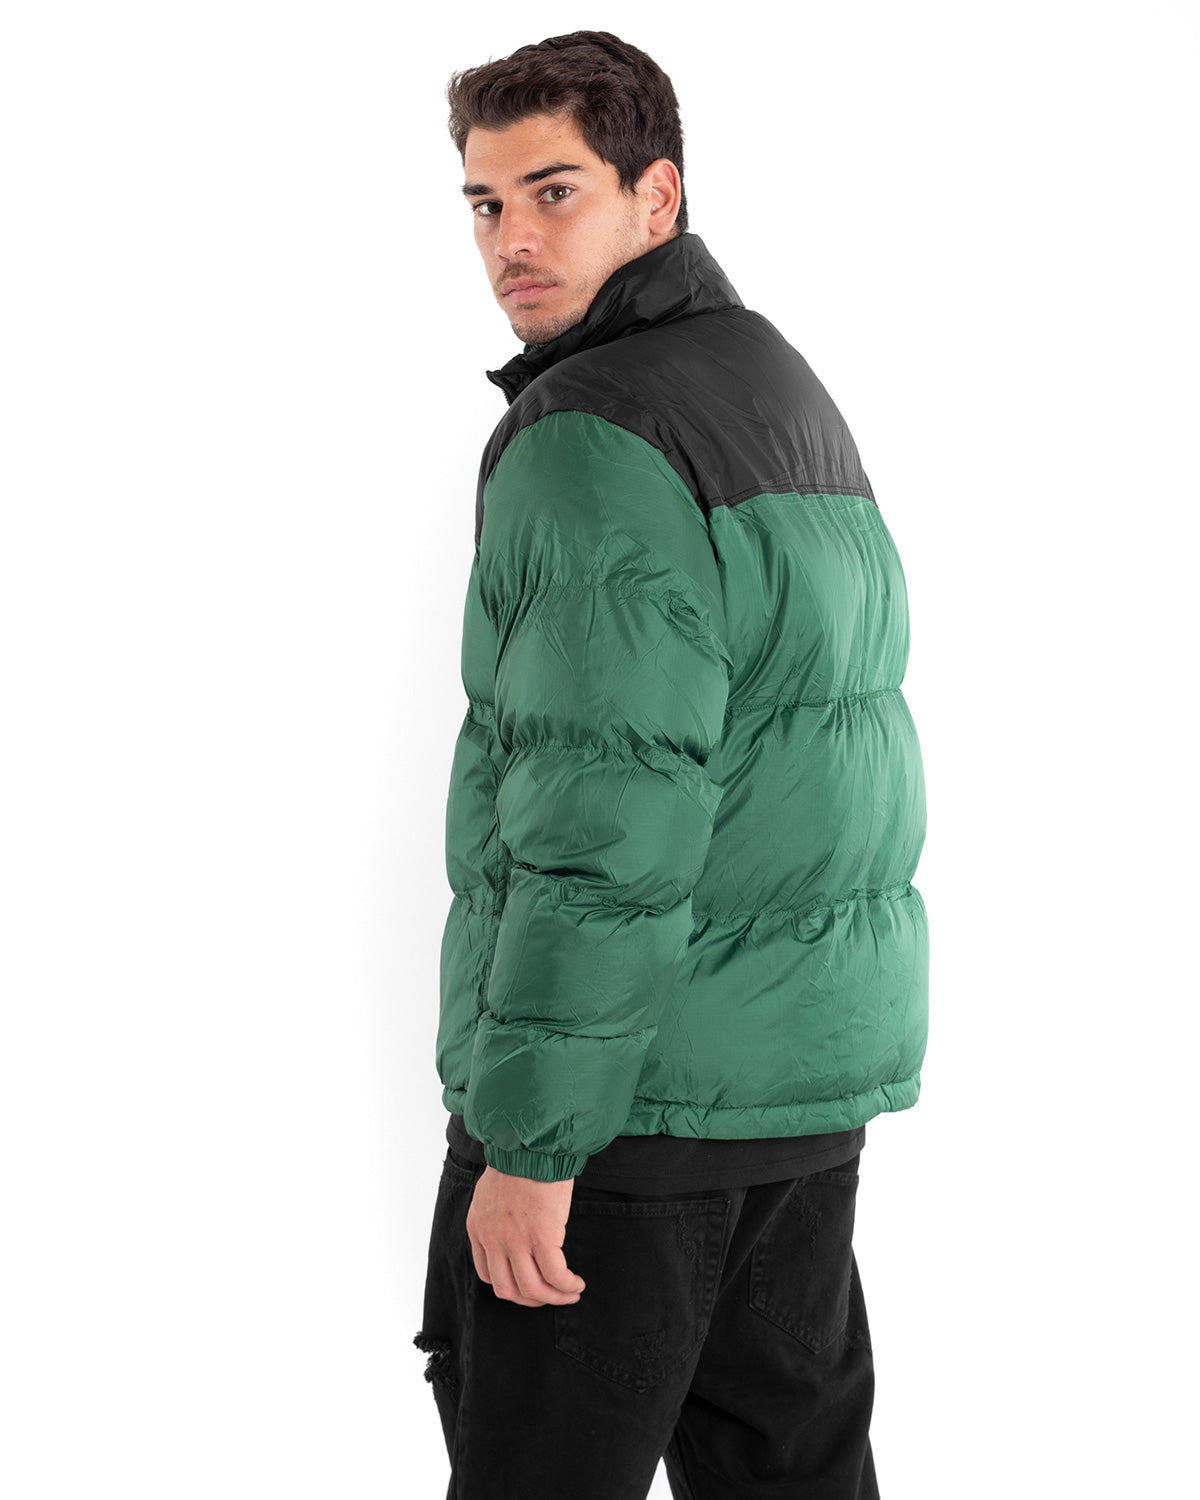 Men's Two-Tone Bomber Jacket Black Green Long Sleeve Casual Padded GIOSAL G2910A